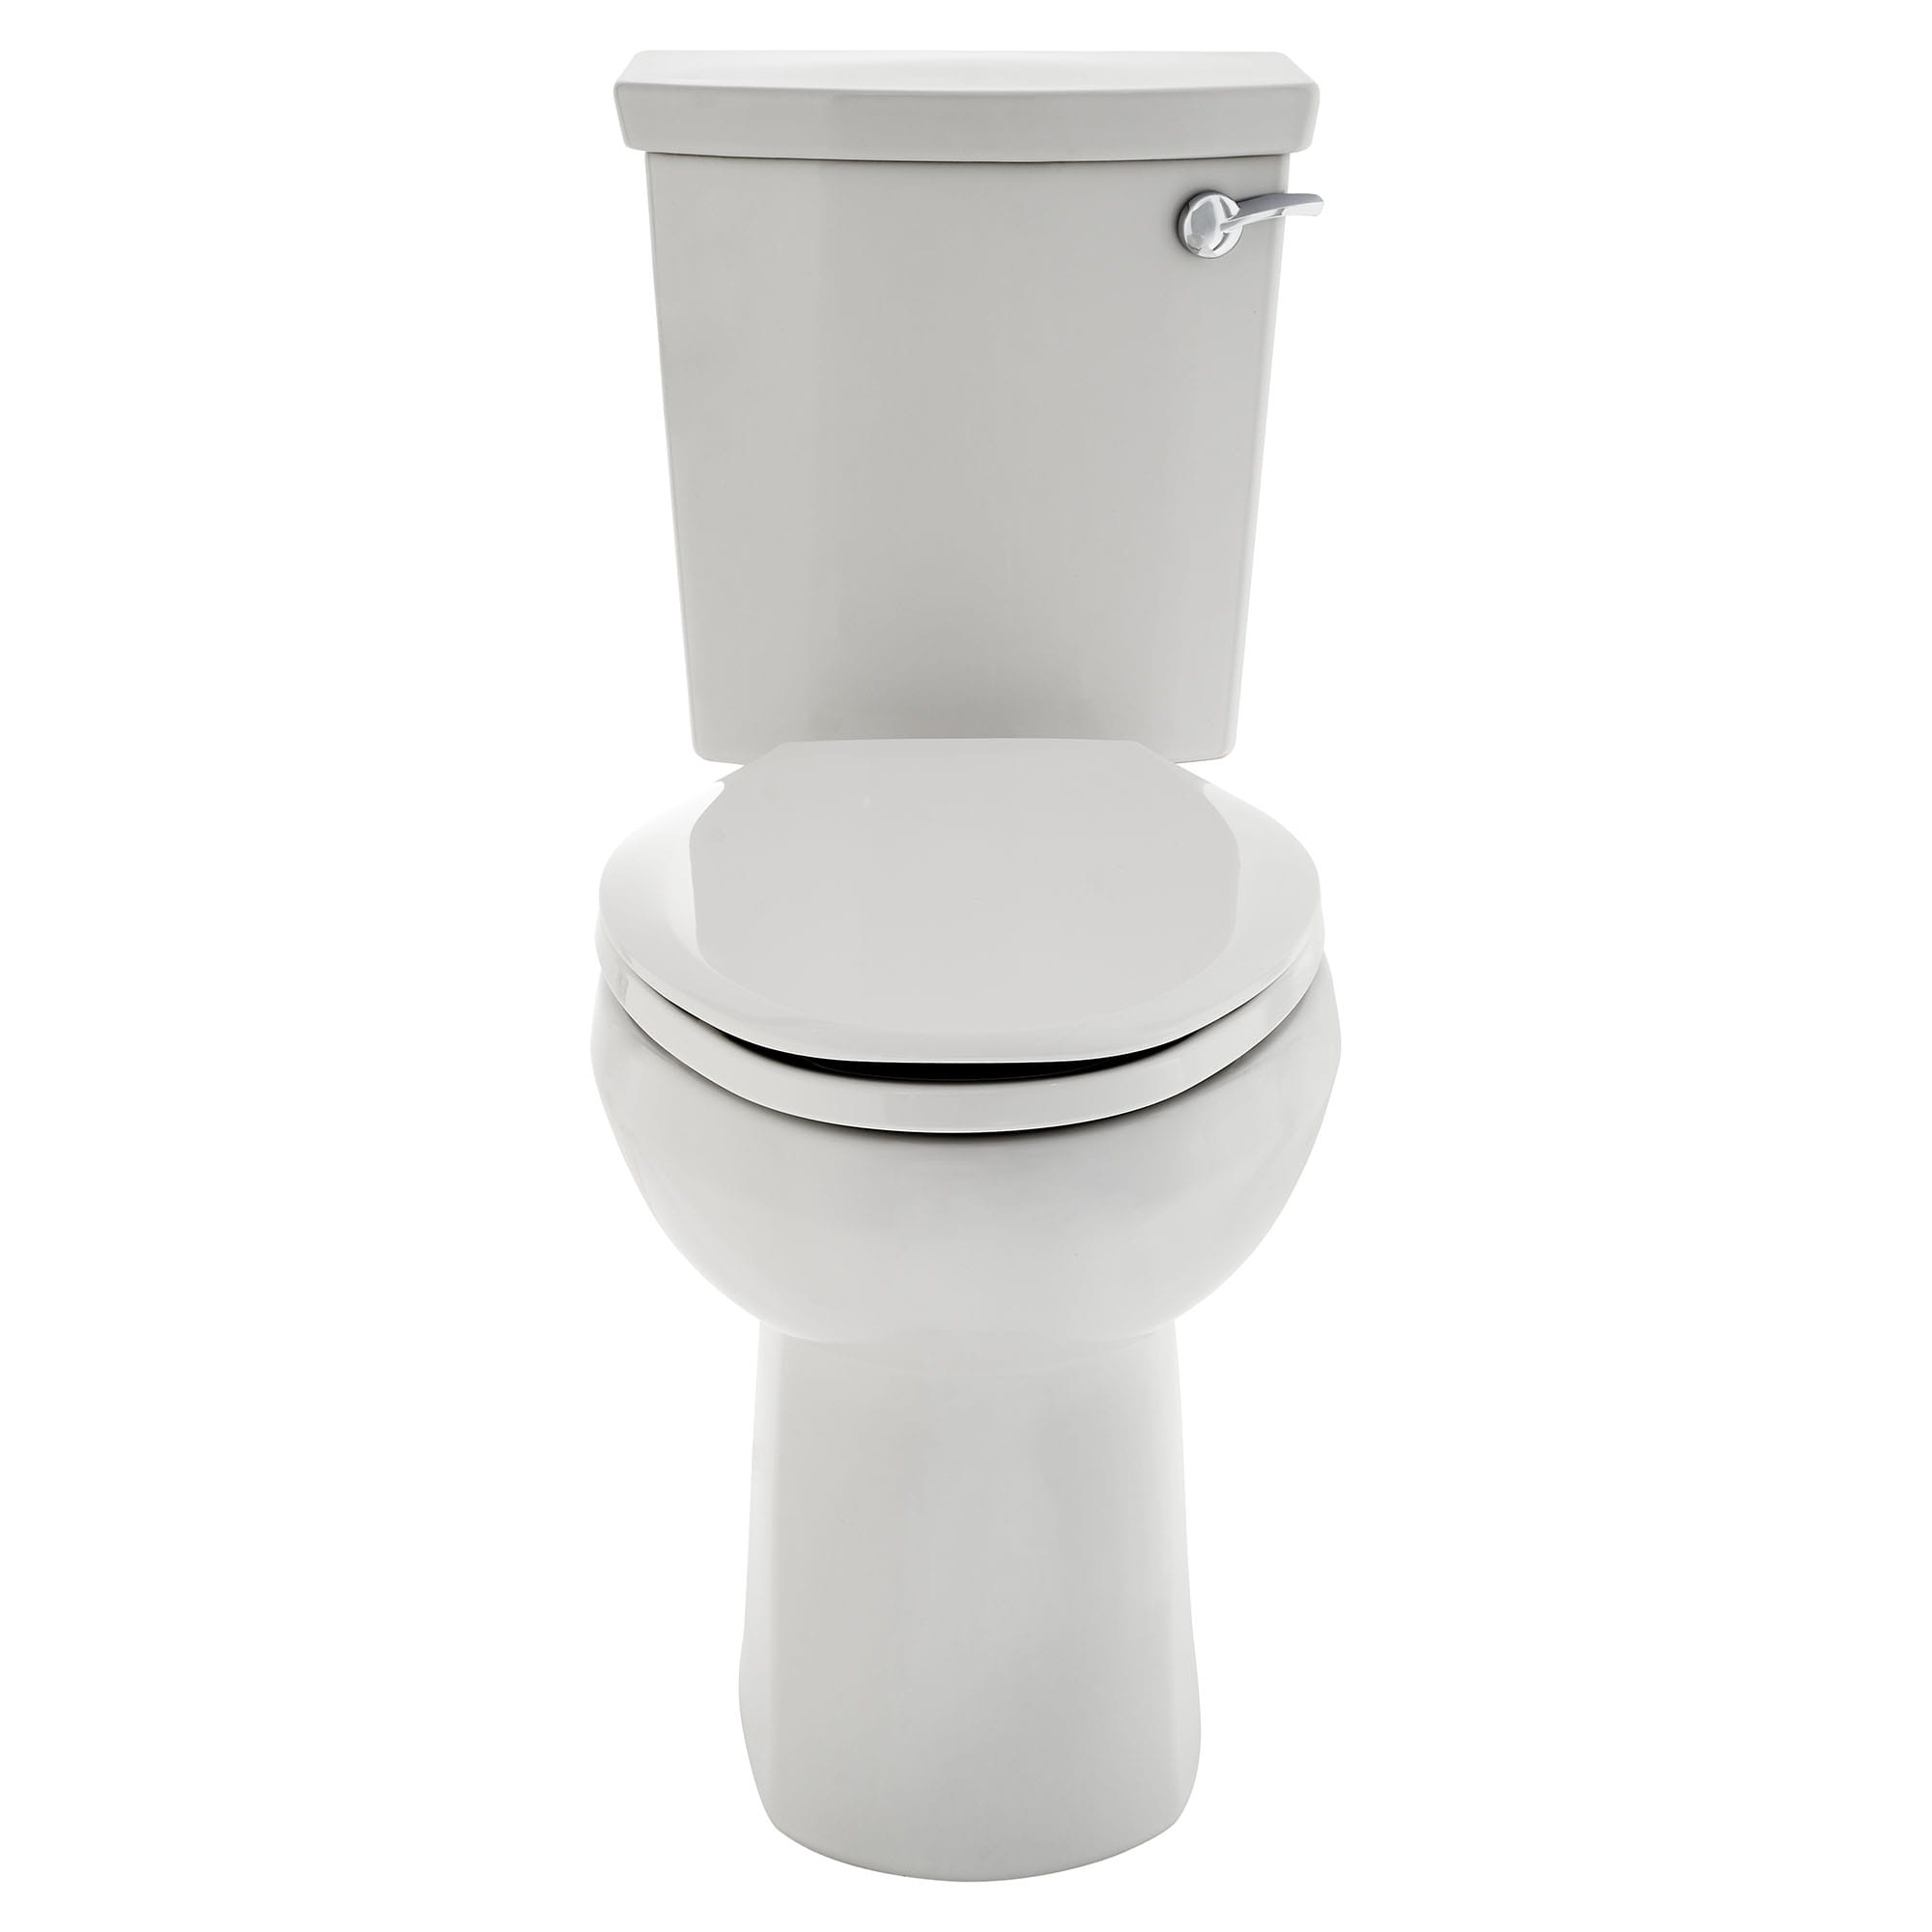 American Standard 288CA114.020 H2Optimum Siphonic Normal Height Elongated Toilet White2-Piece 